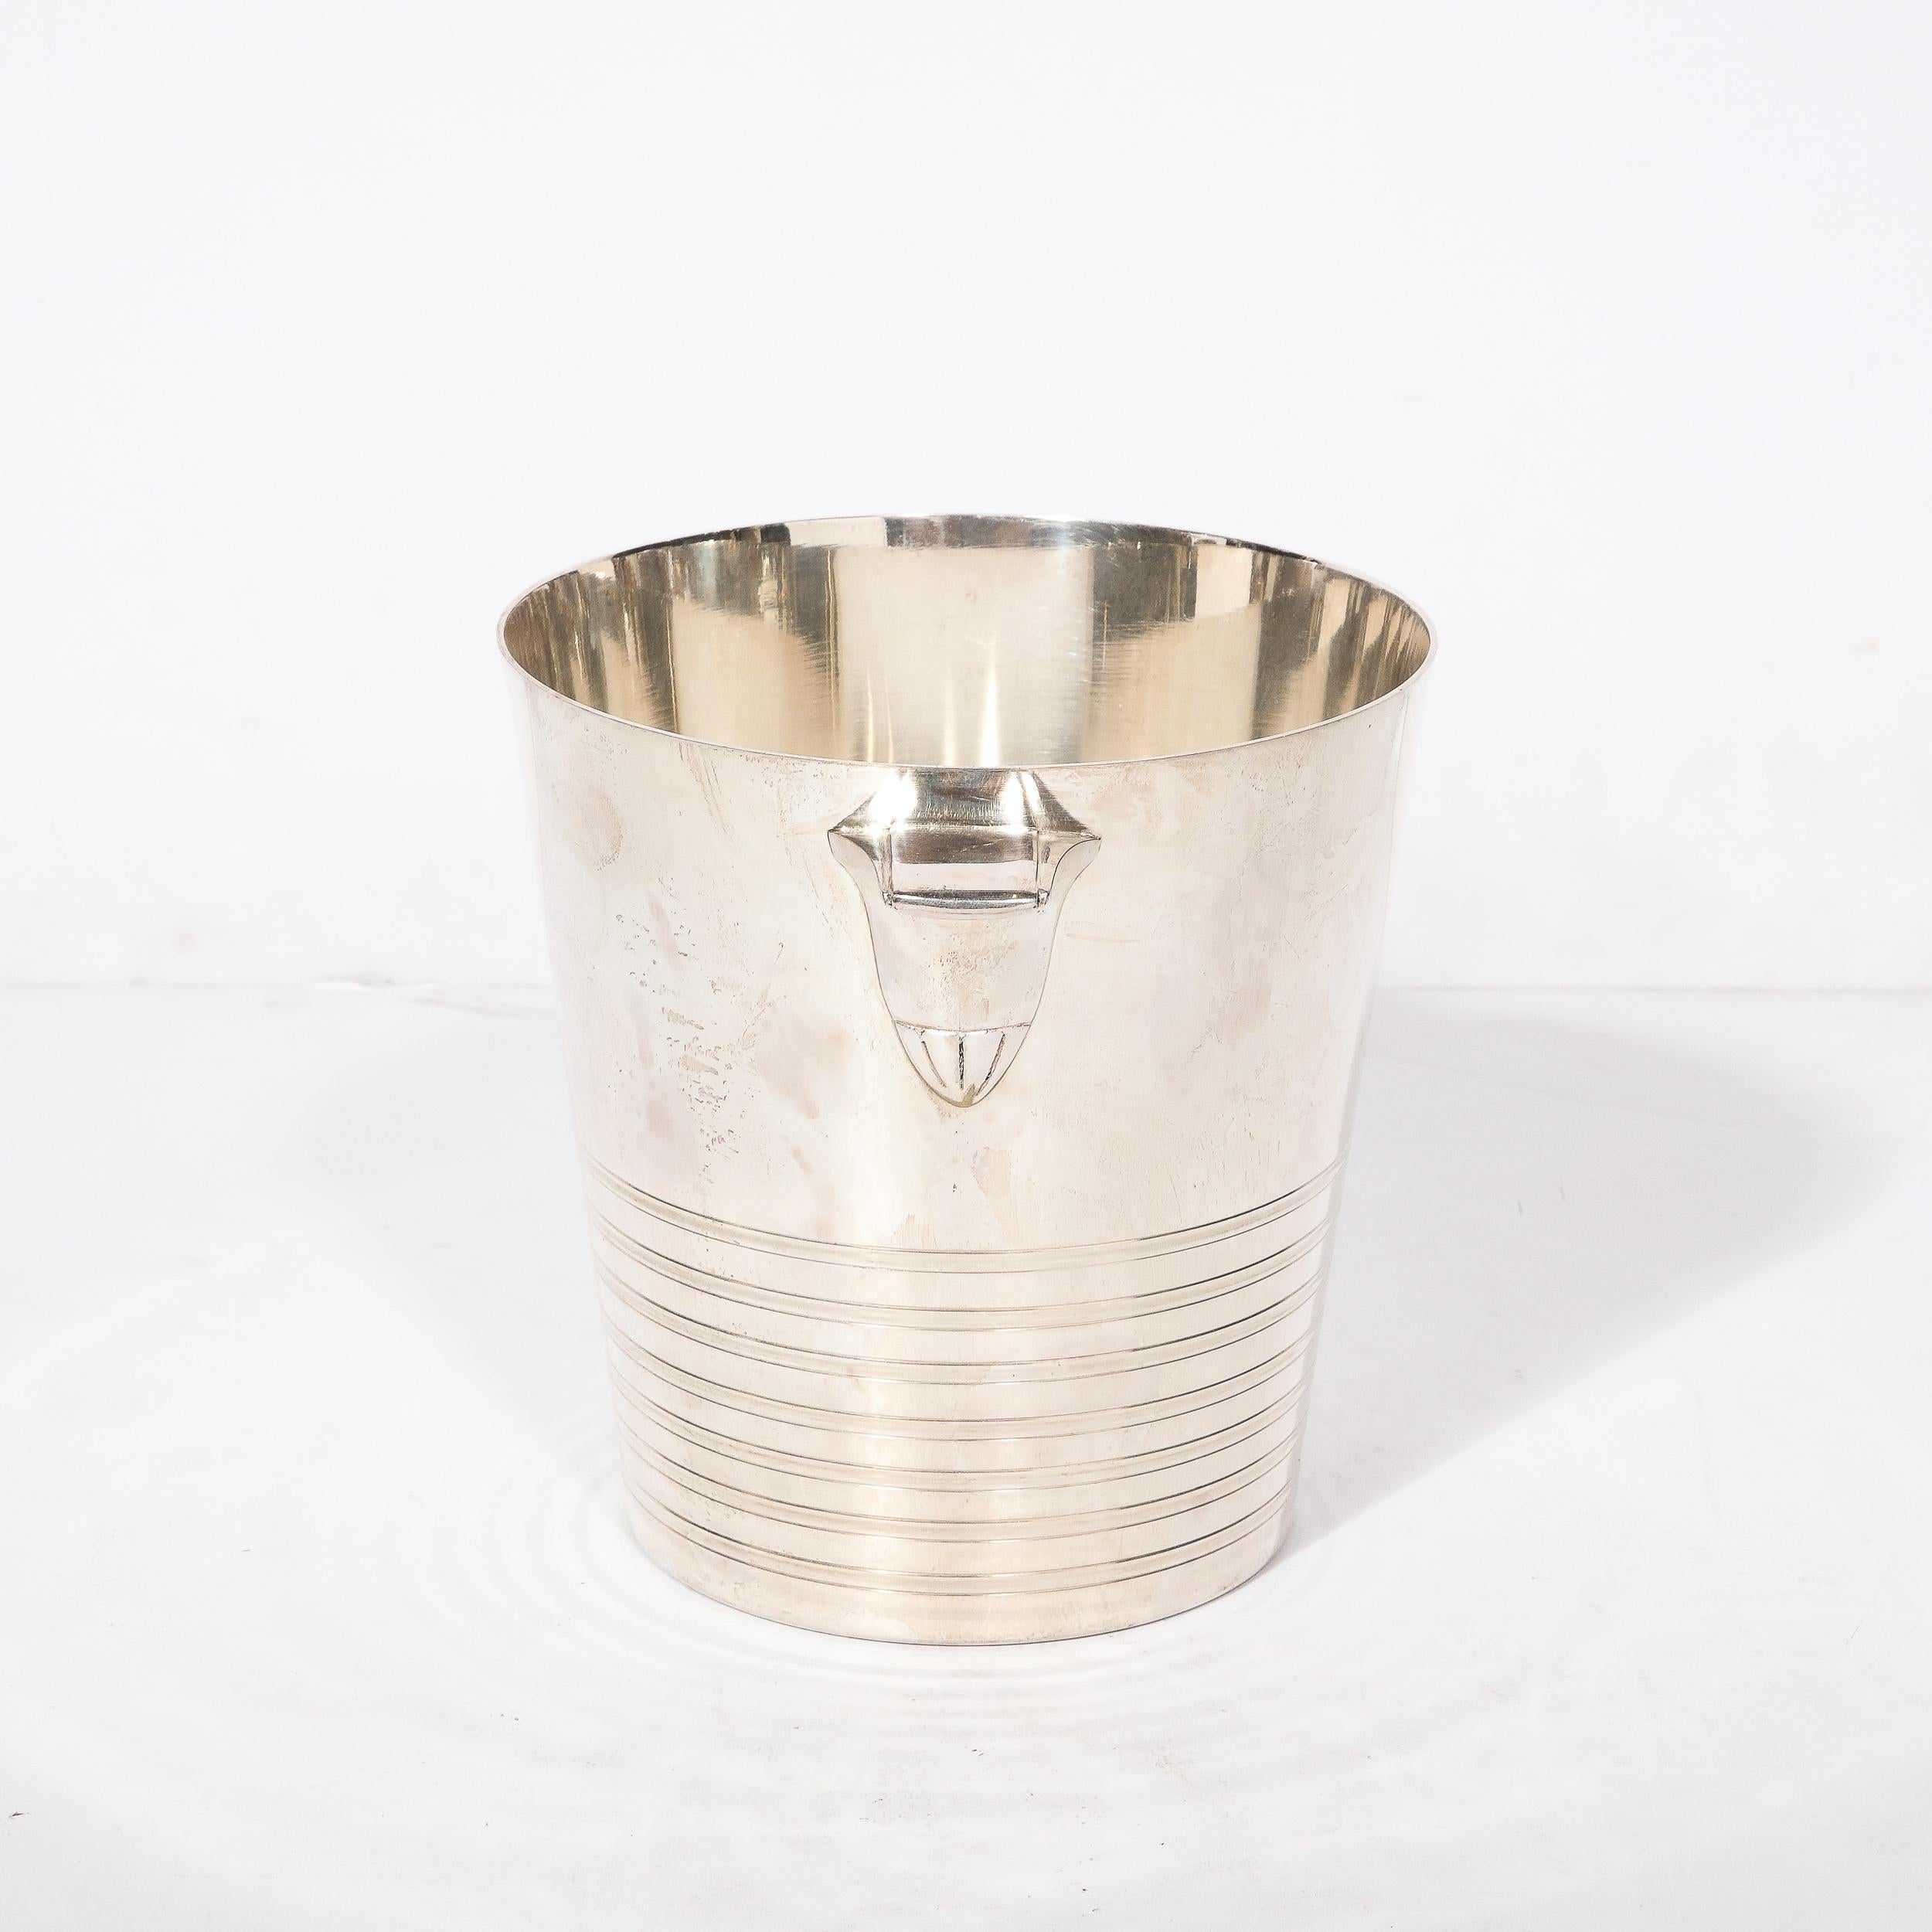 Mid-20th Century Art Deco Silver Plate Ice Bucket with Curved Handles and Banded Detailing For Sale